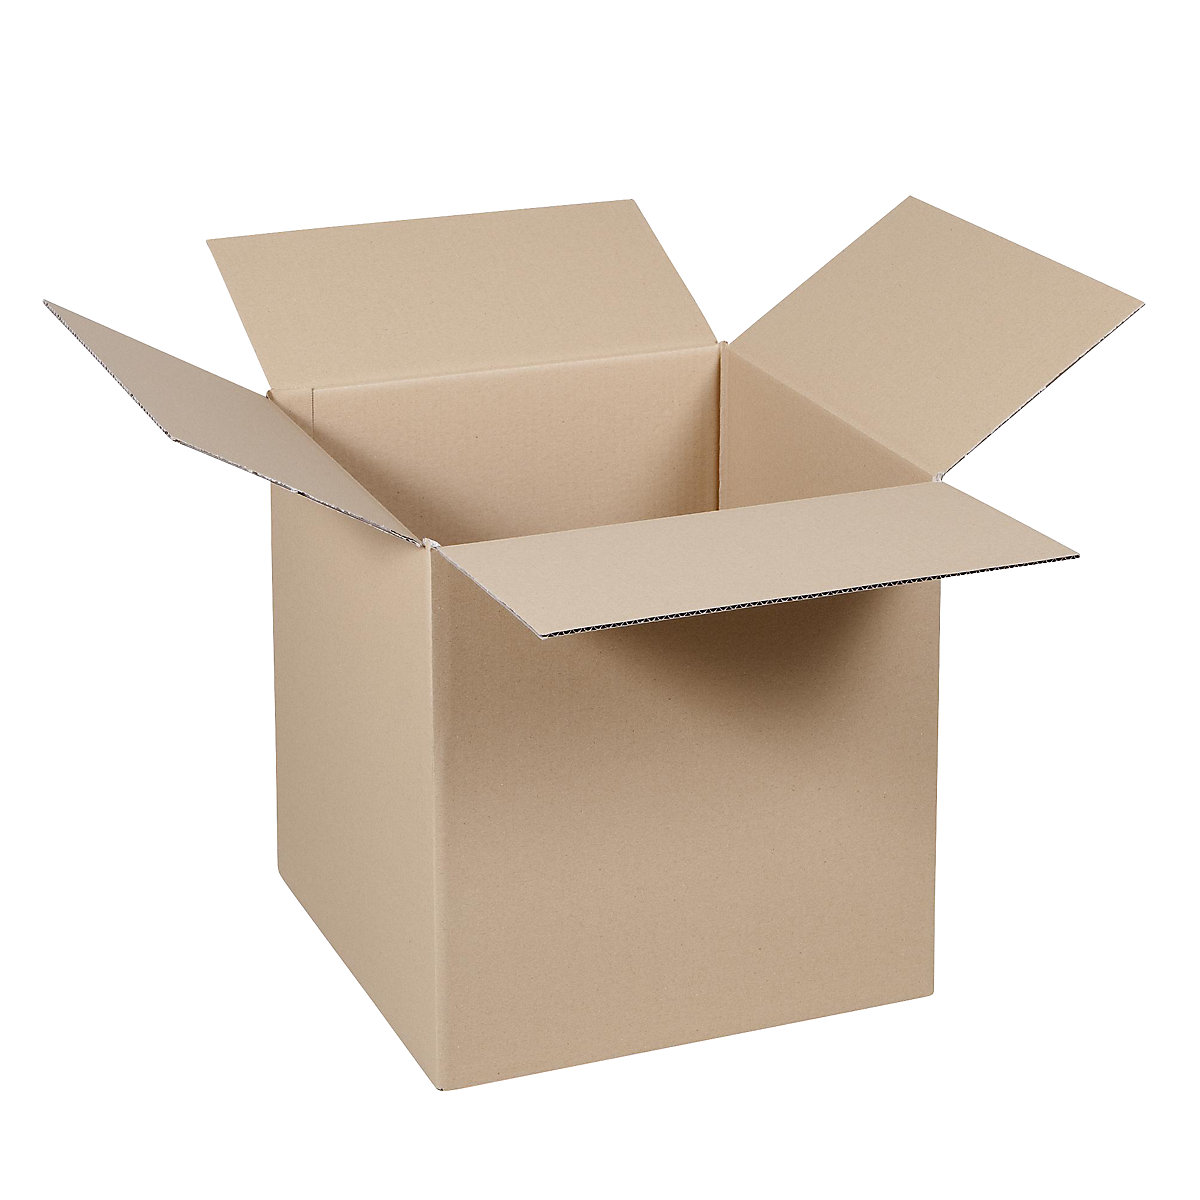 Folding cardboard box, FEFCO 0201, made of double fluted cardboard, internal dimensions 250 x 250 x 250 mm, pack of 100-32